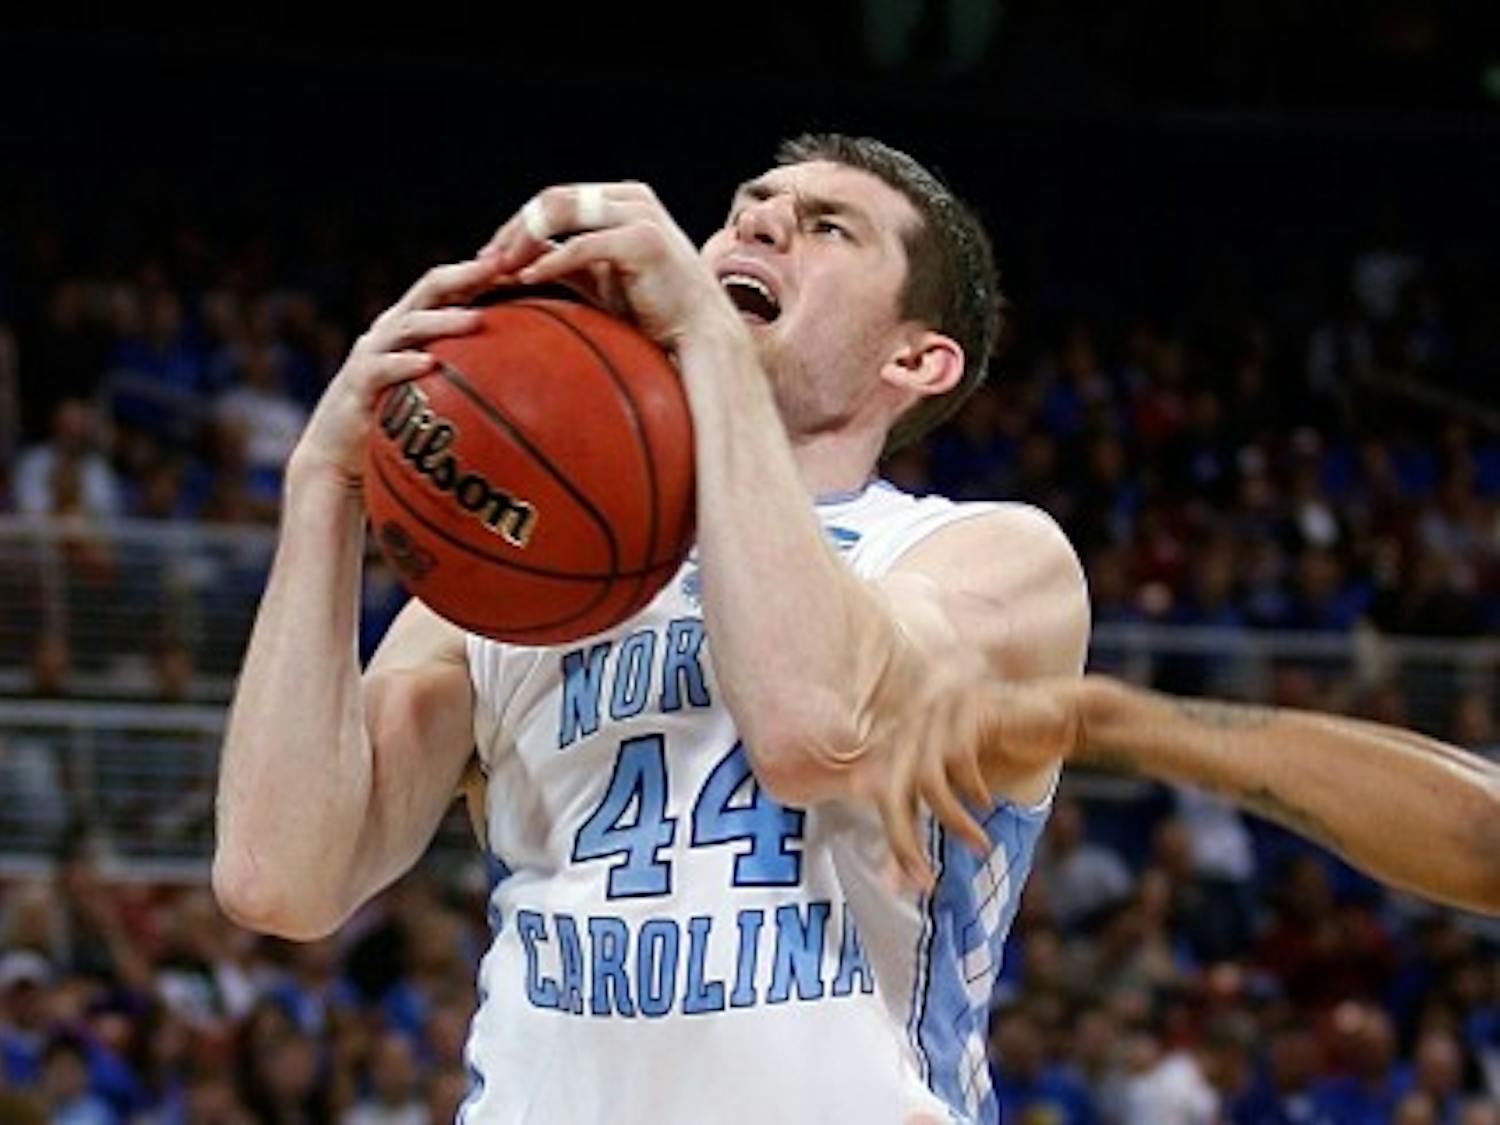 UNC forward Tyler Zeller is fouled during the Tar Heels' win over Ohio, 73-65, in overtime at the Edward Jones Dome in St. Louis in the Sweet 16 of the 2012 NCAA Tournament. (DTH File/Stephen Mitchell)